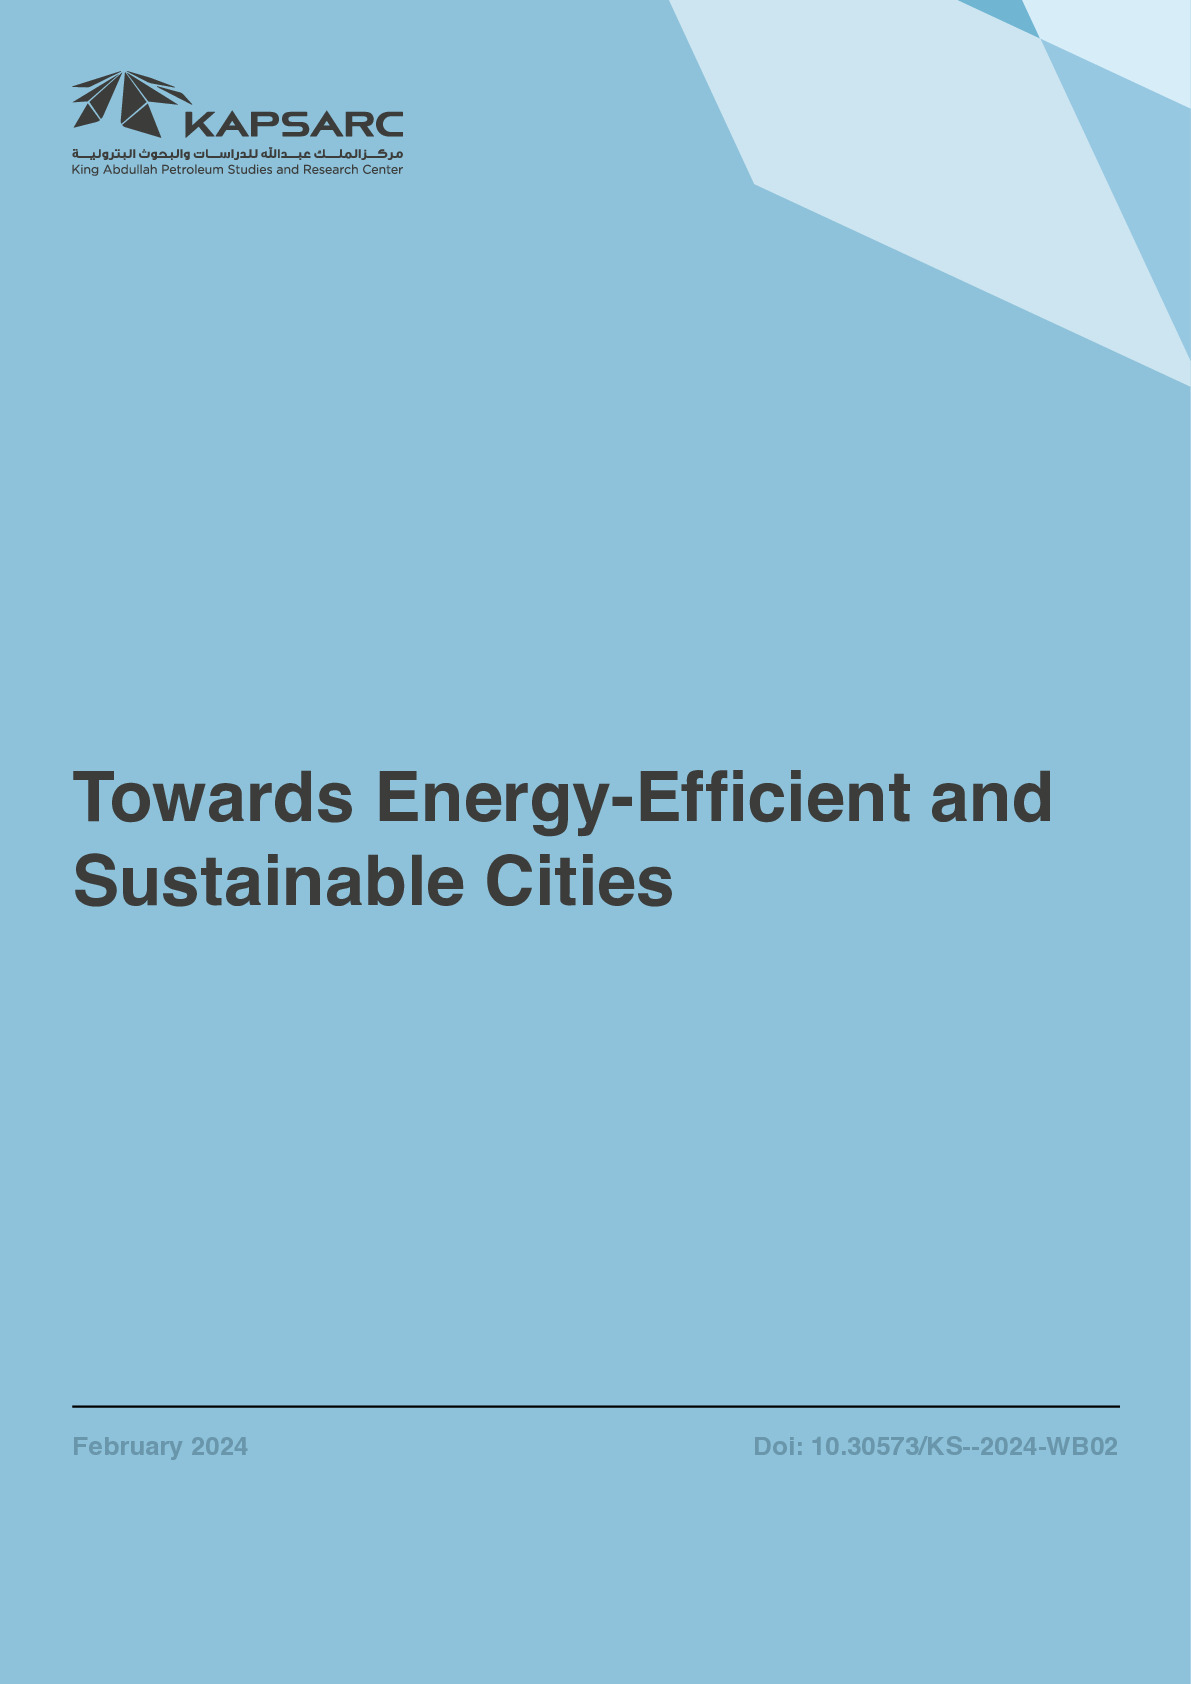 Towards Energy-Efficient and Sustainable Cities